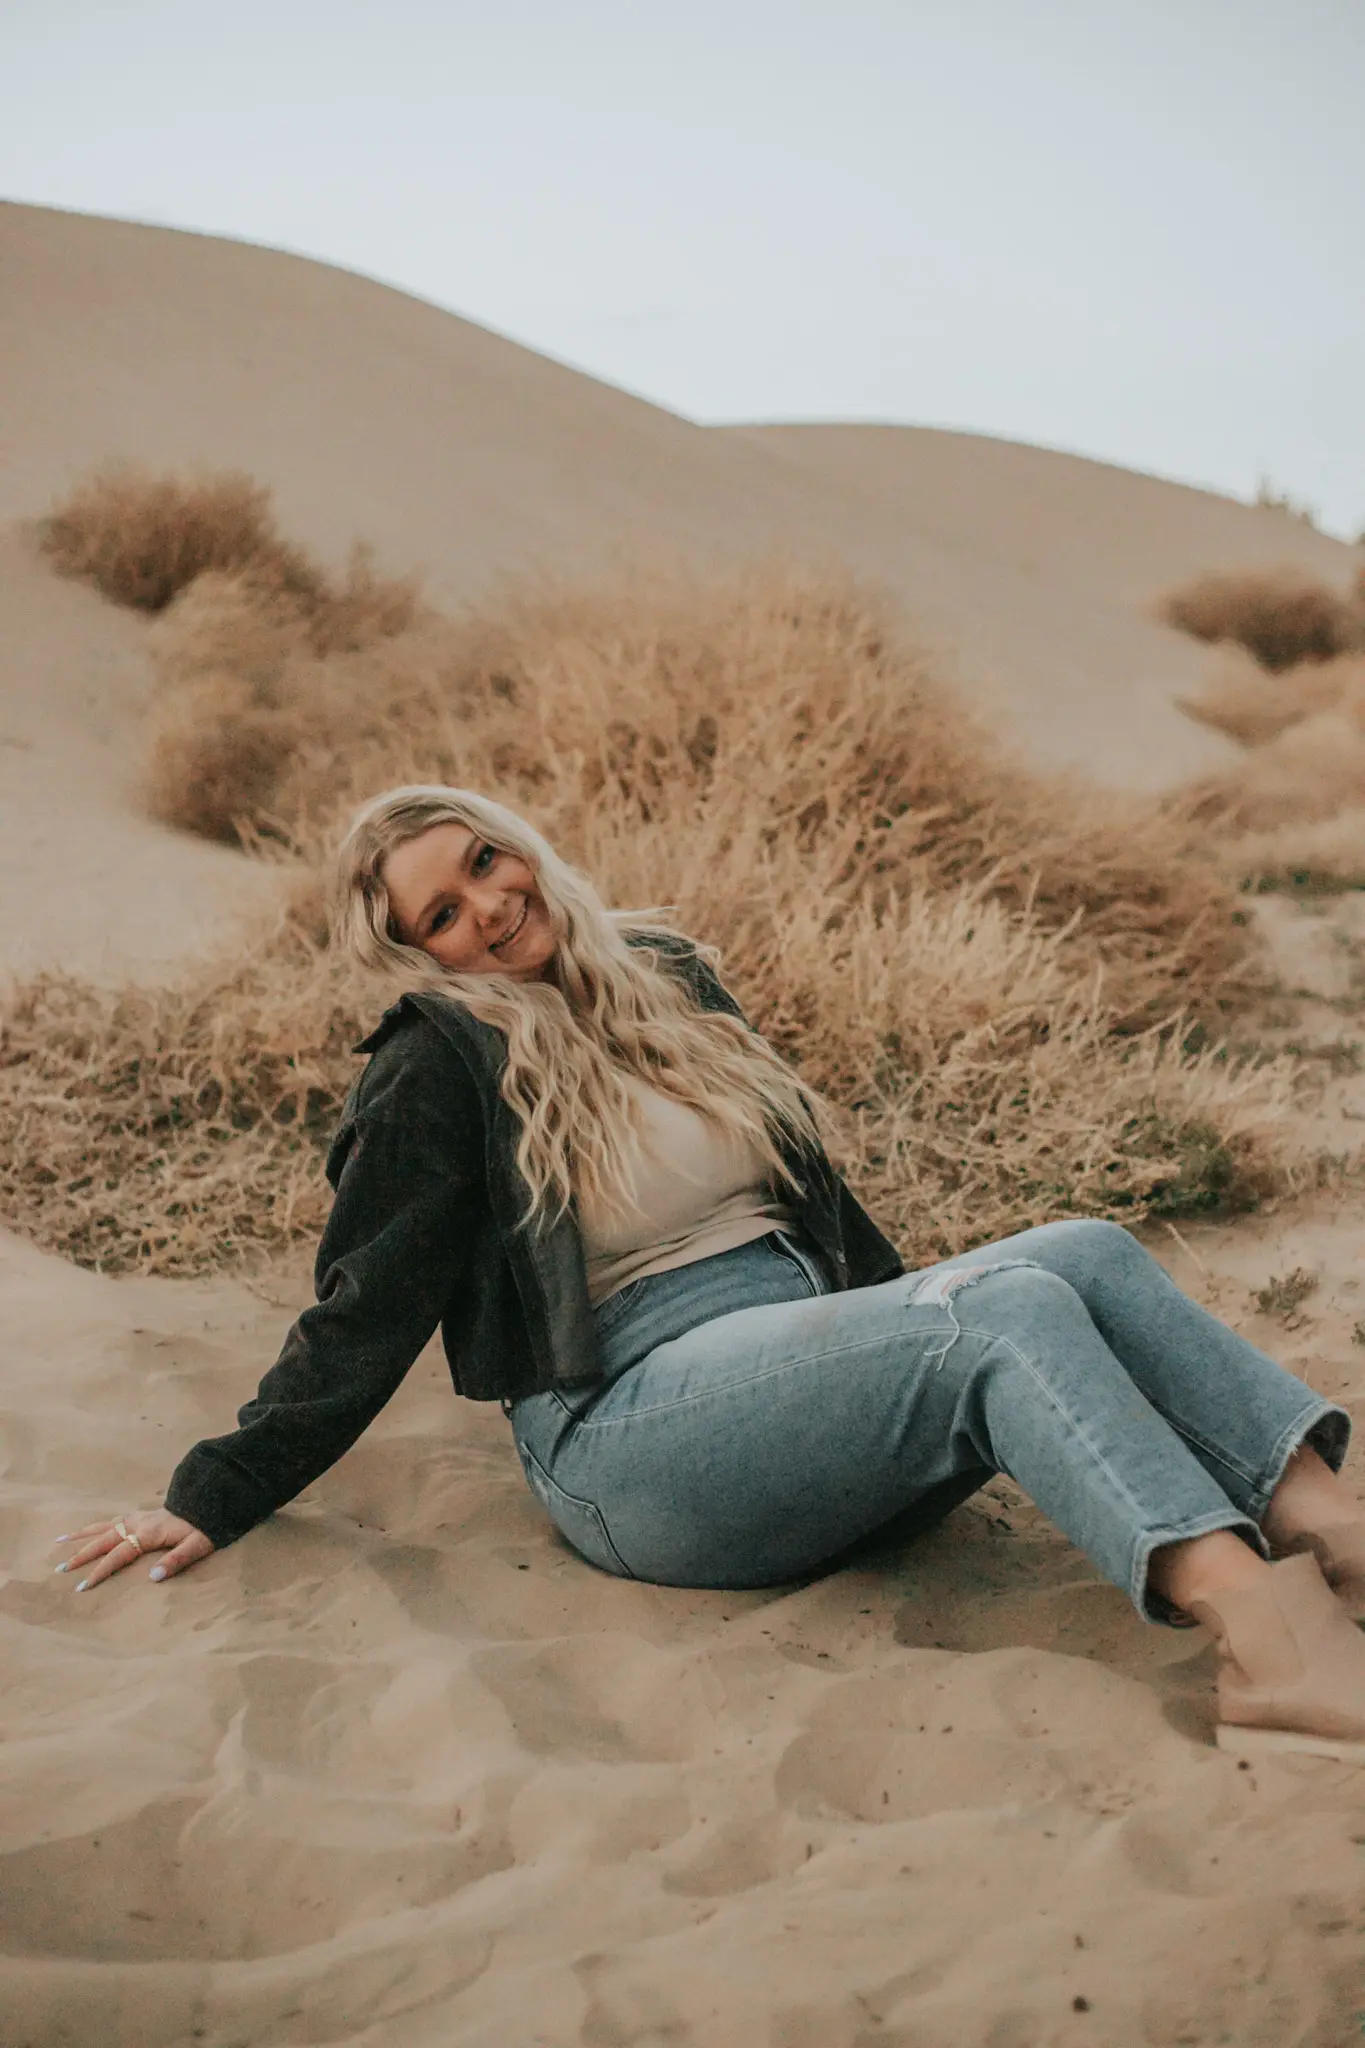 Brynelle sitting on the ground at the sand dunes and smiling